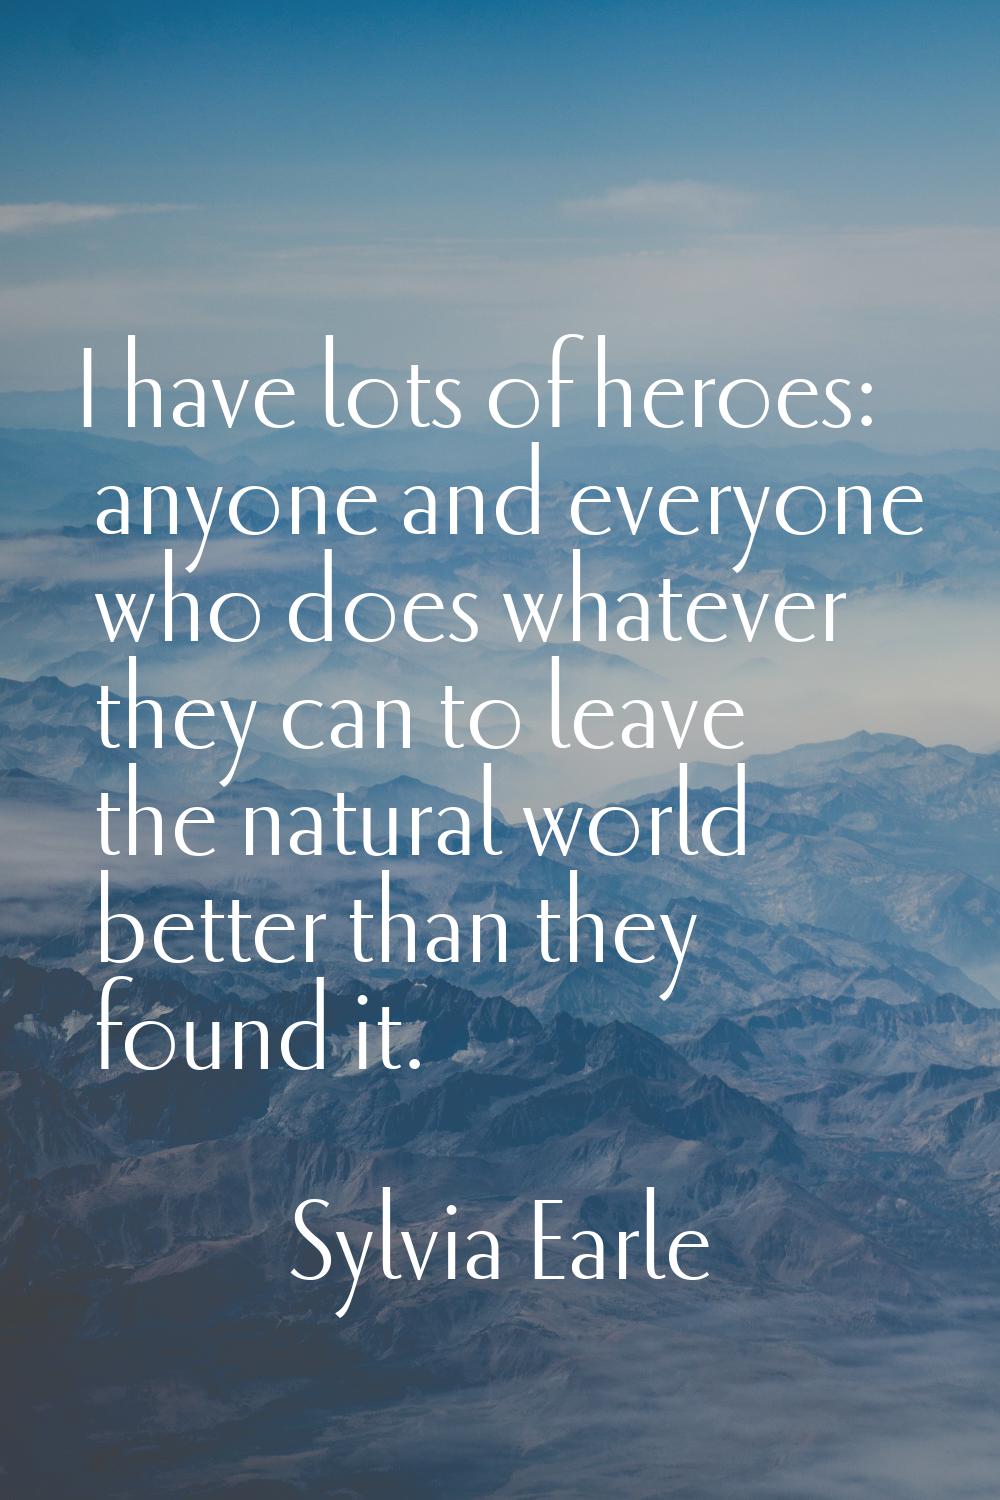 I have lots of heroes: anyone and everyone who does whatever they can to leave the natural world be